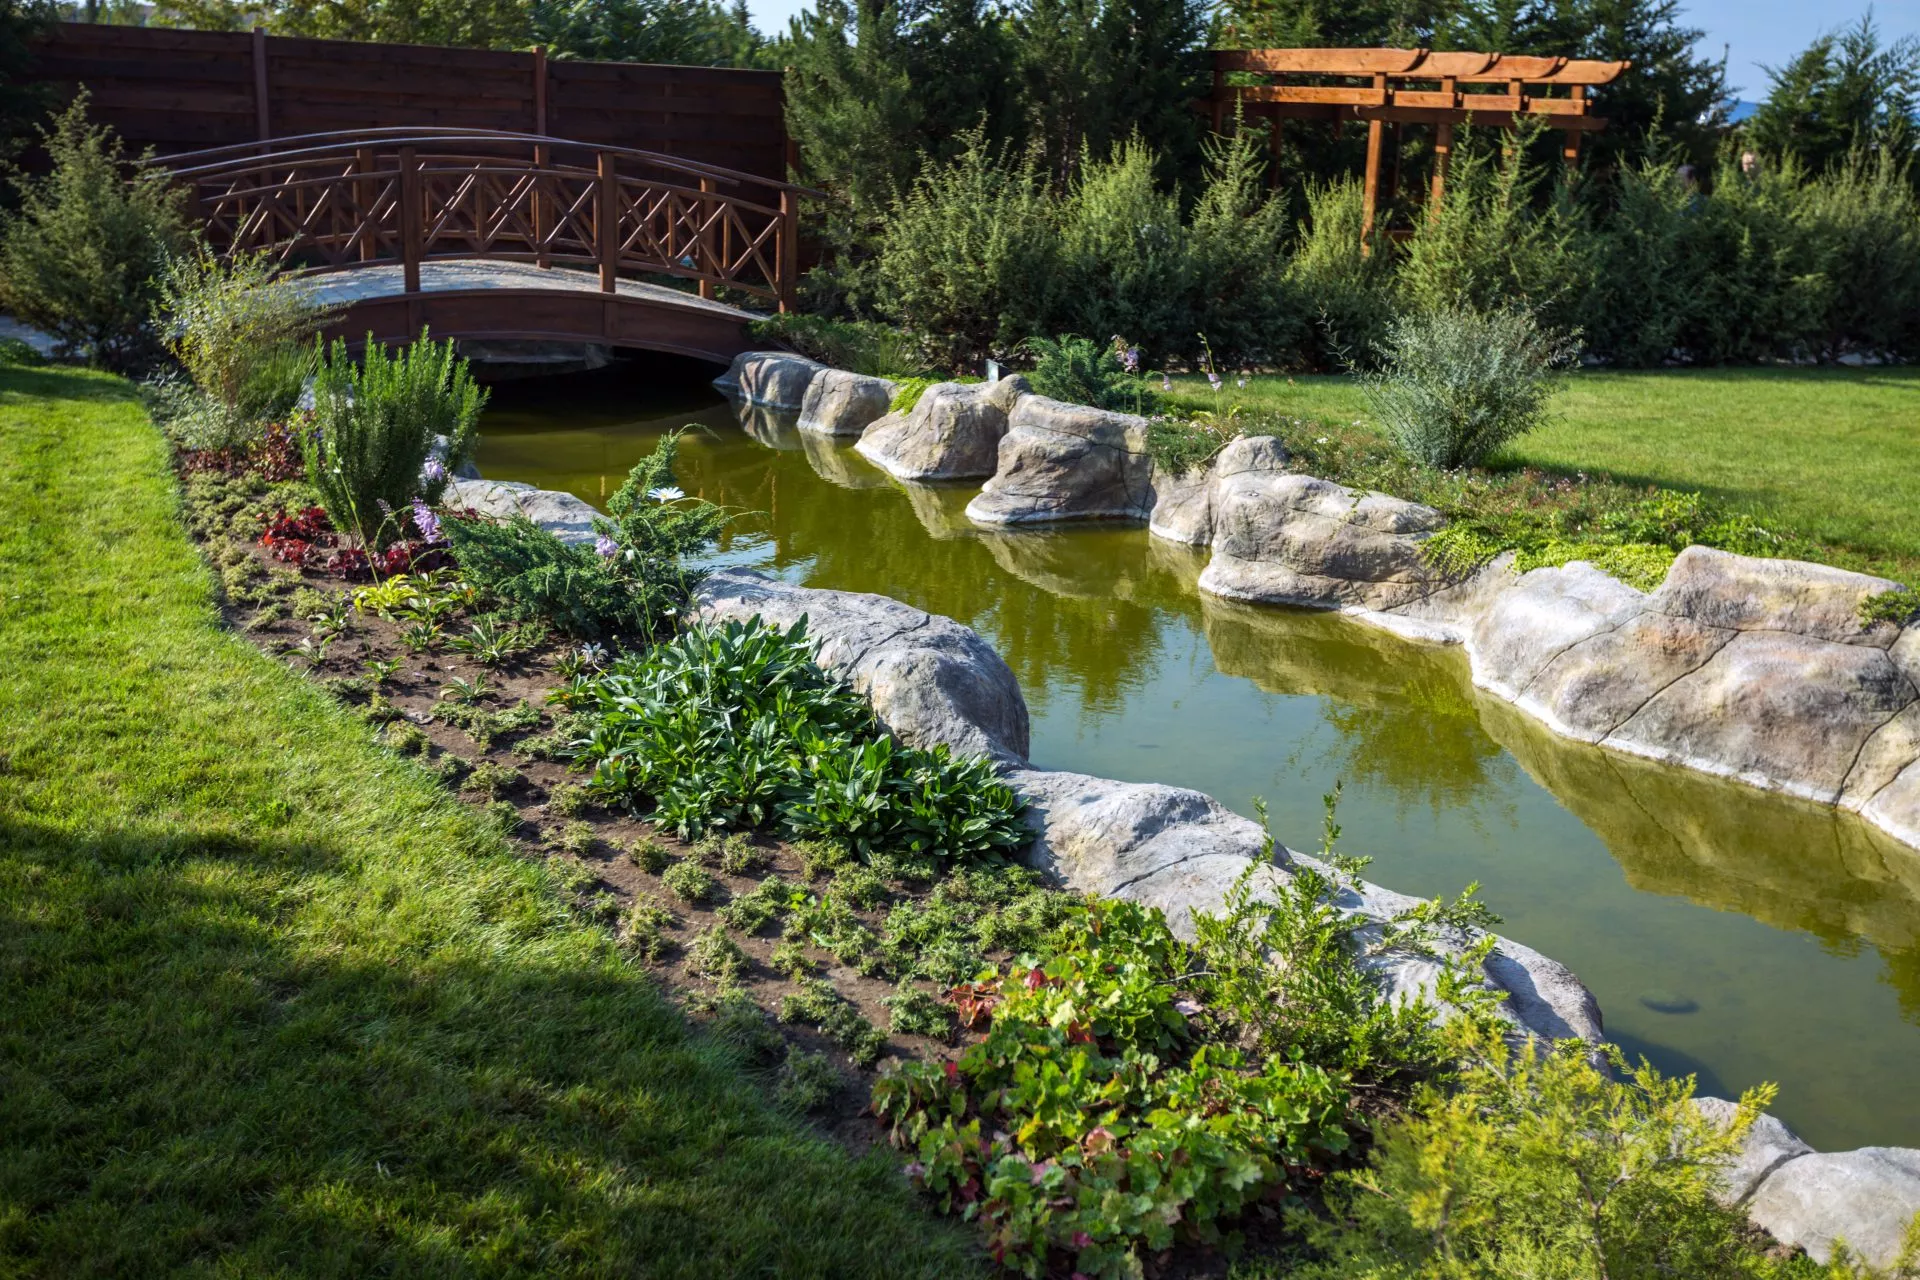 Check out these hottest current landscaping trends.